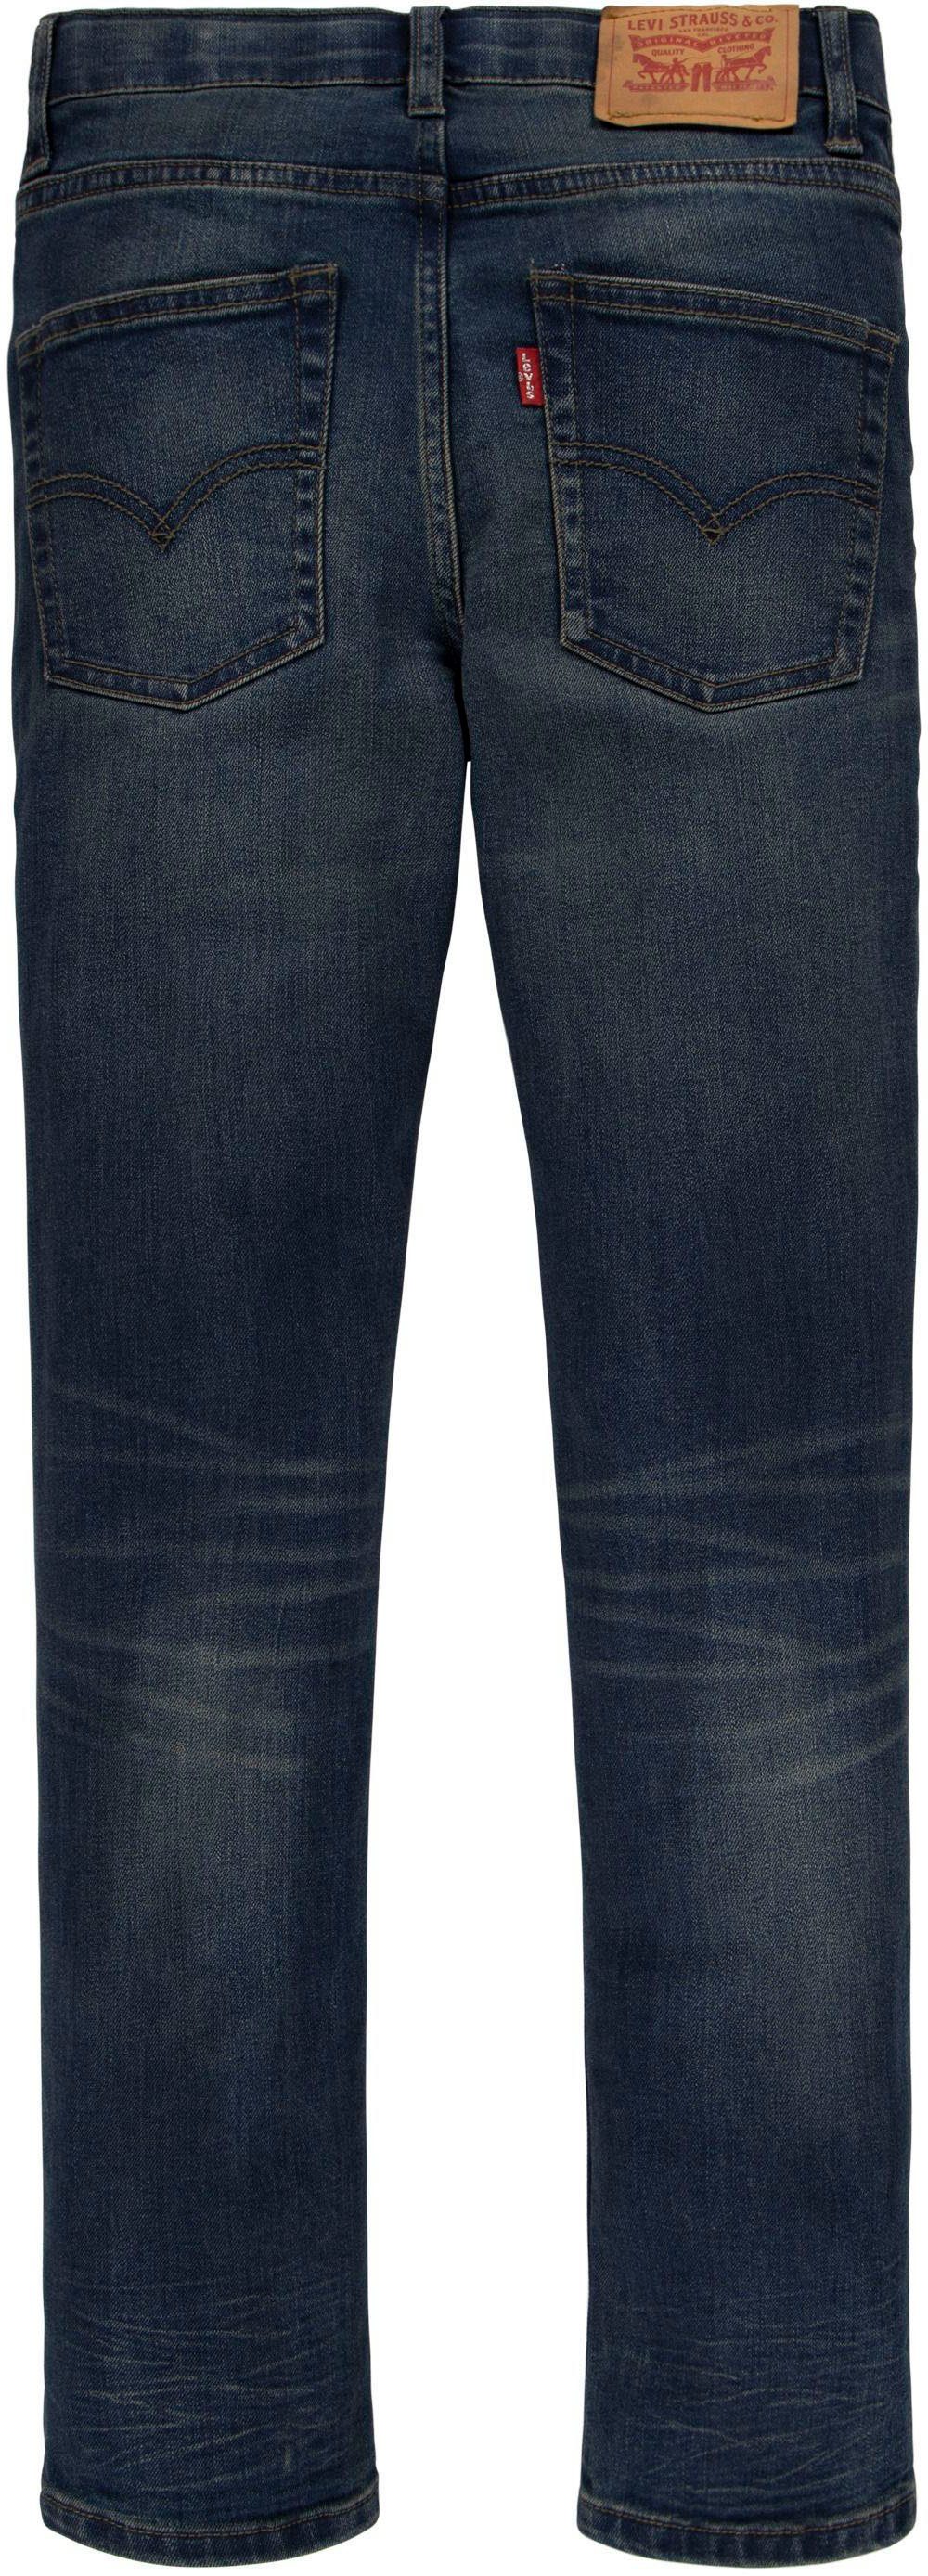 510 JEANS Skinny-fit-Jeans Kids FIT for Levi's® BOYS mixed tape SKINNY